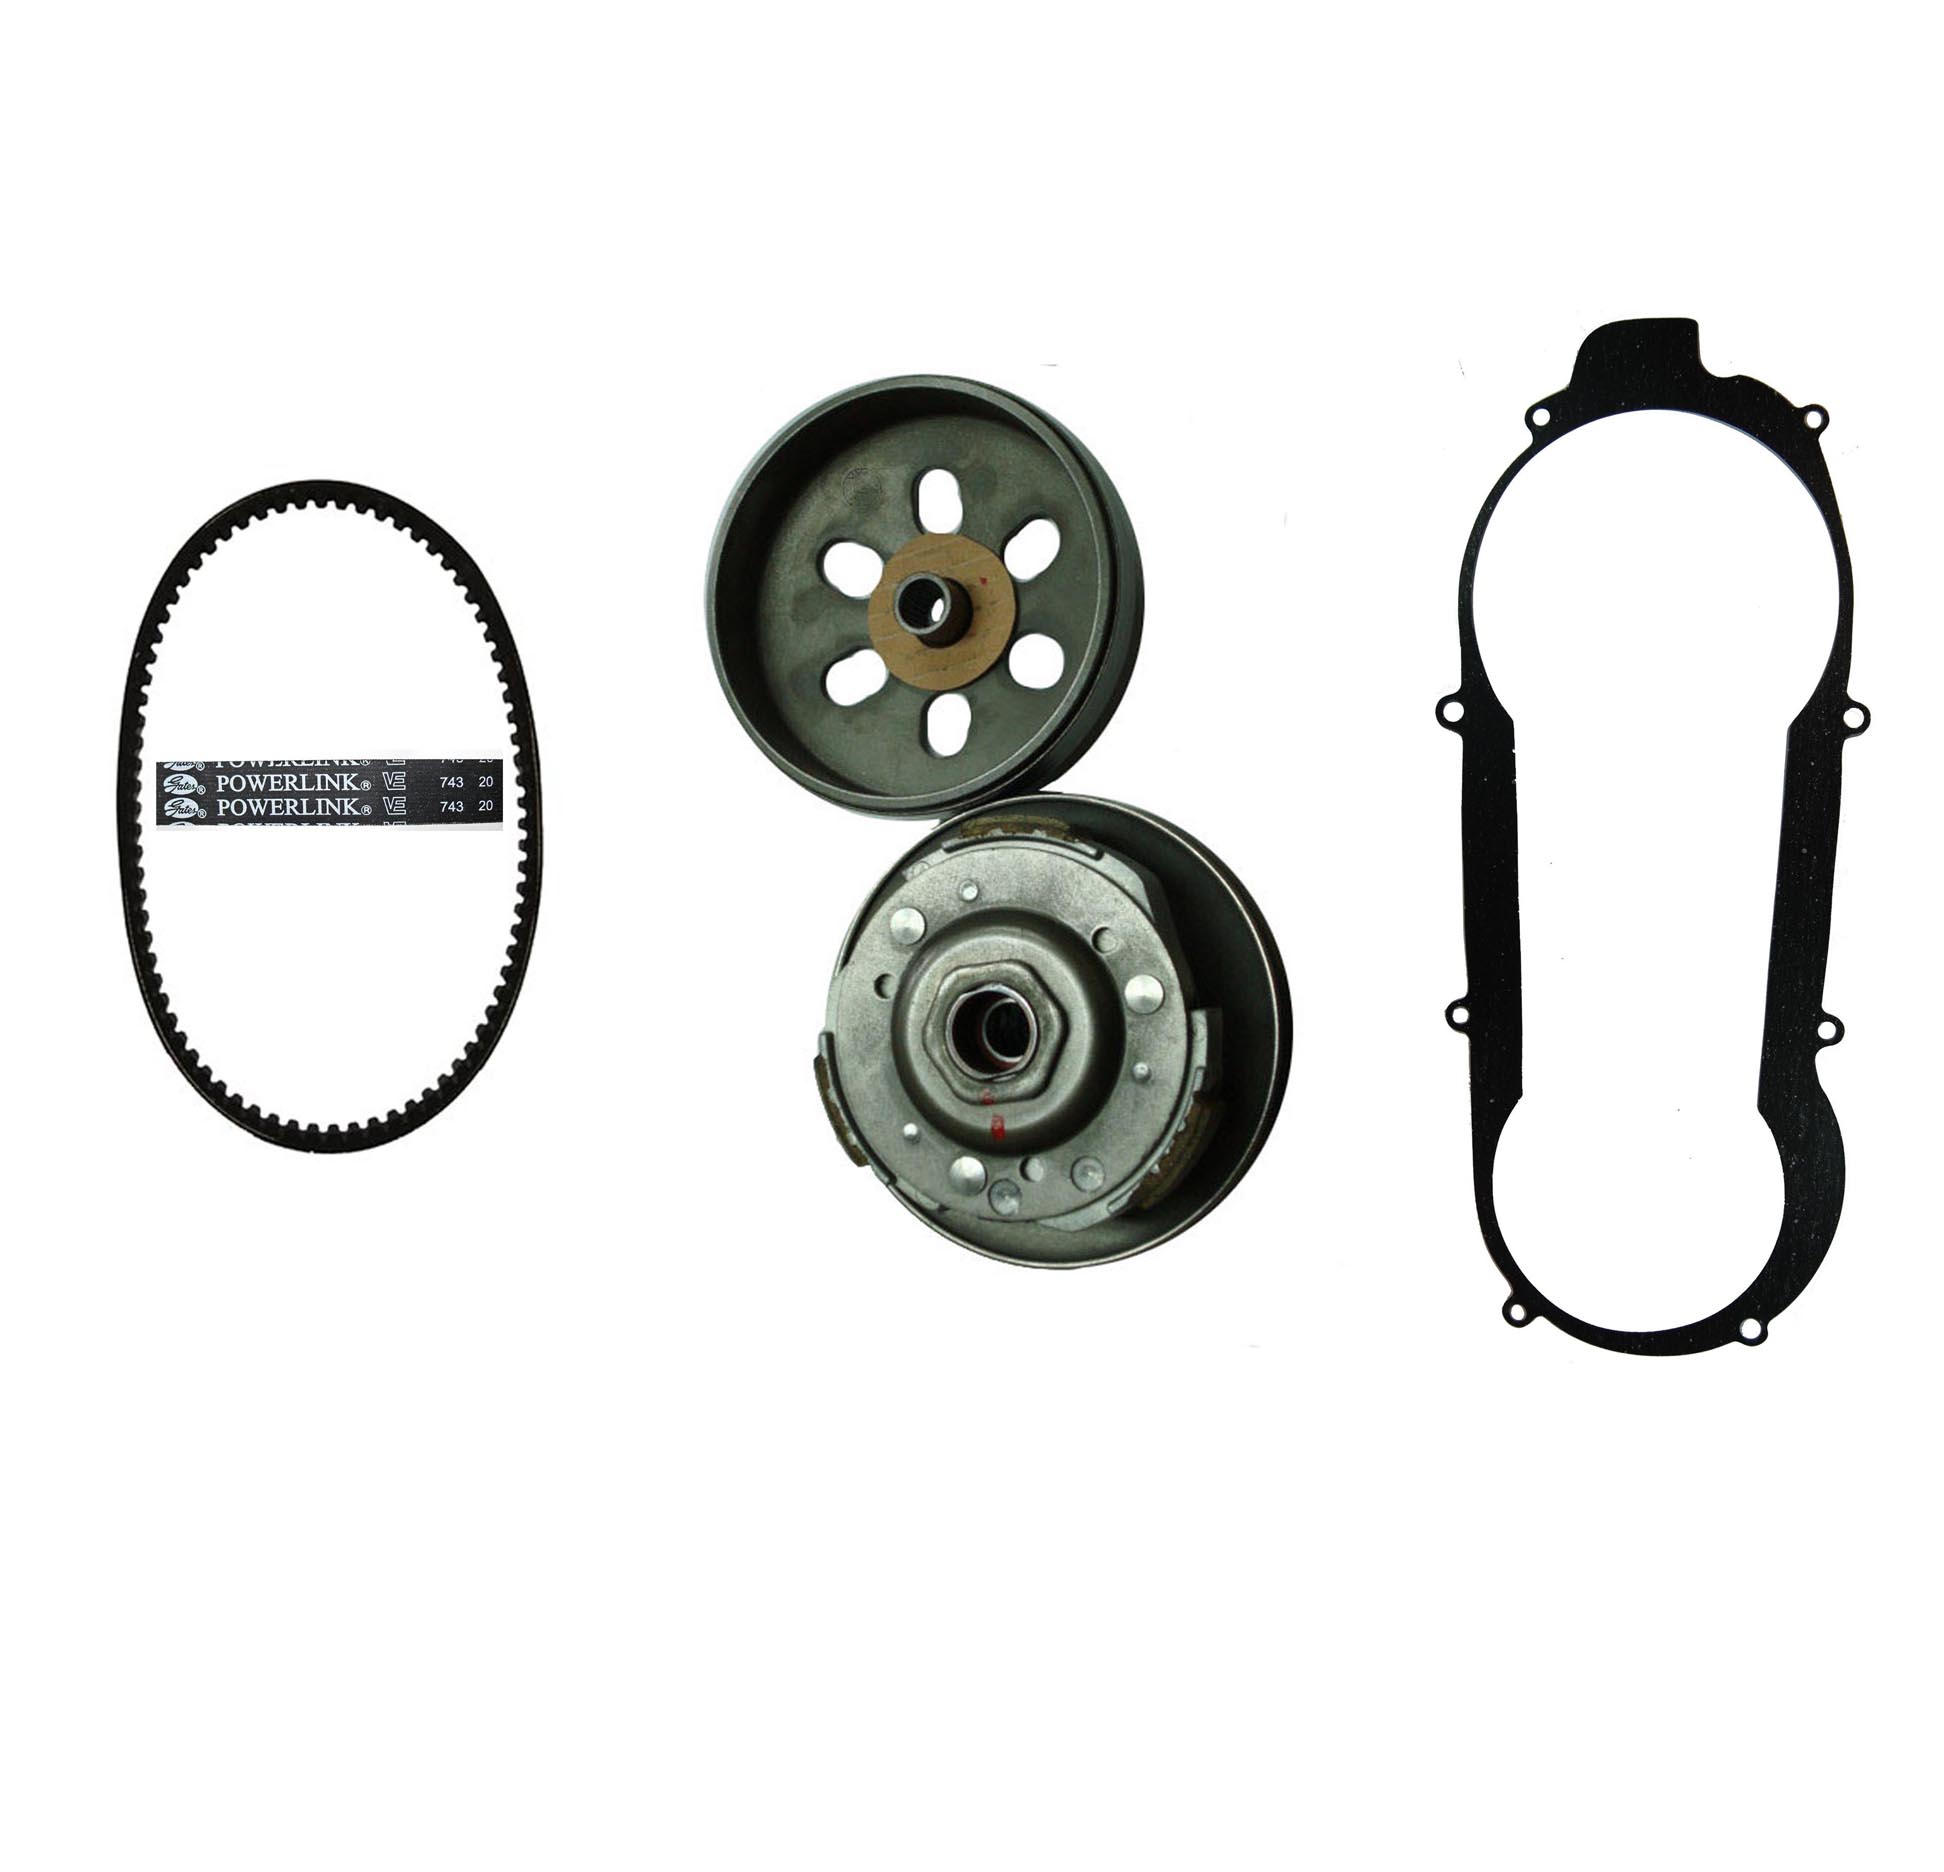 GY6-150 Rear Clutch & Powerlink Belt Kit (Short Case) For use on units with the 743x20x30 Belt - Click Image to Close